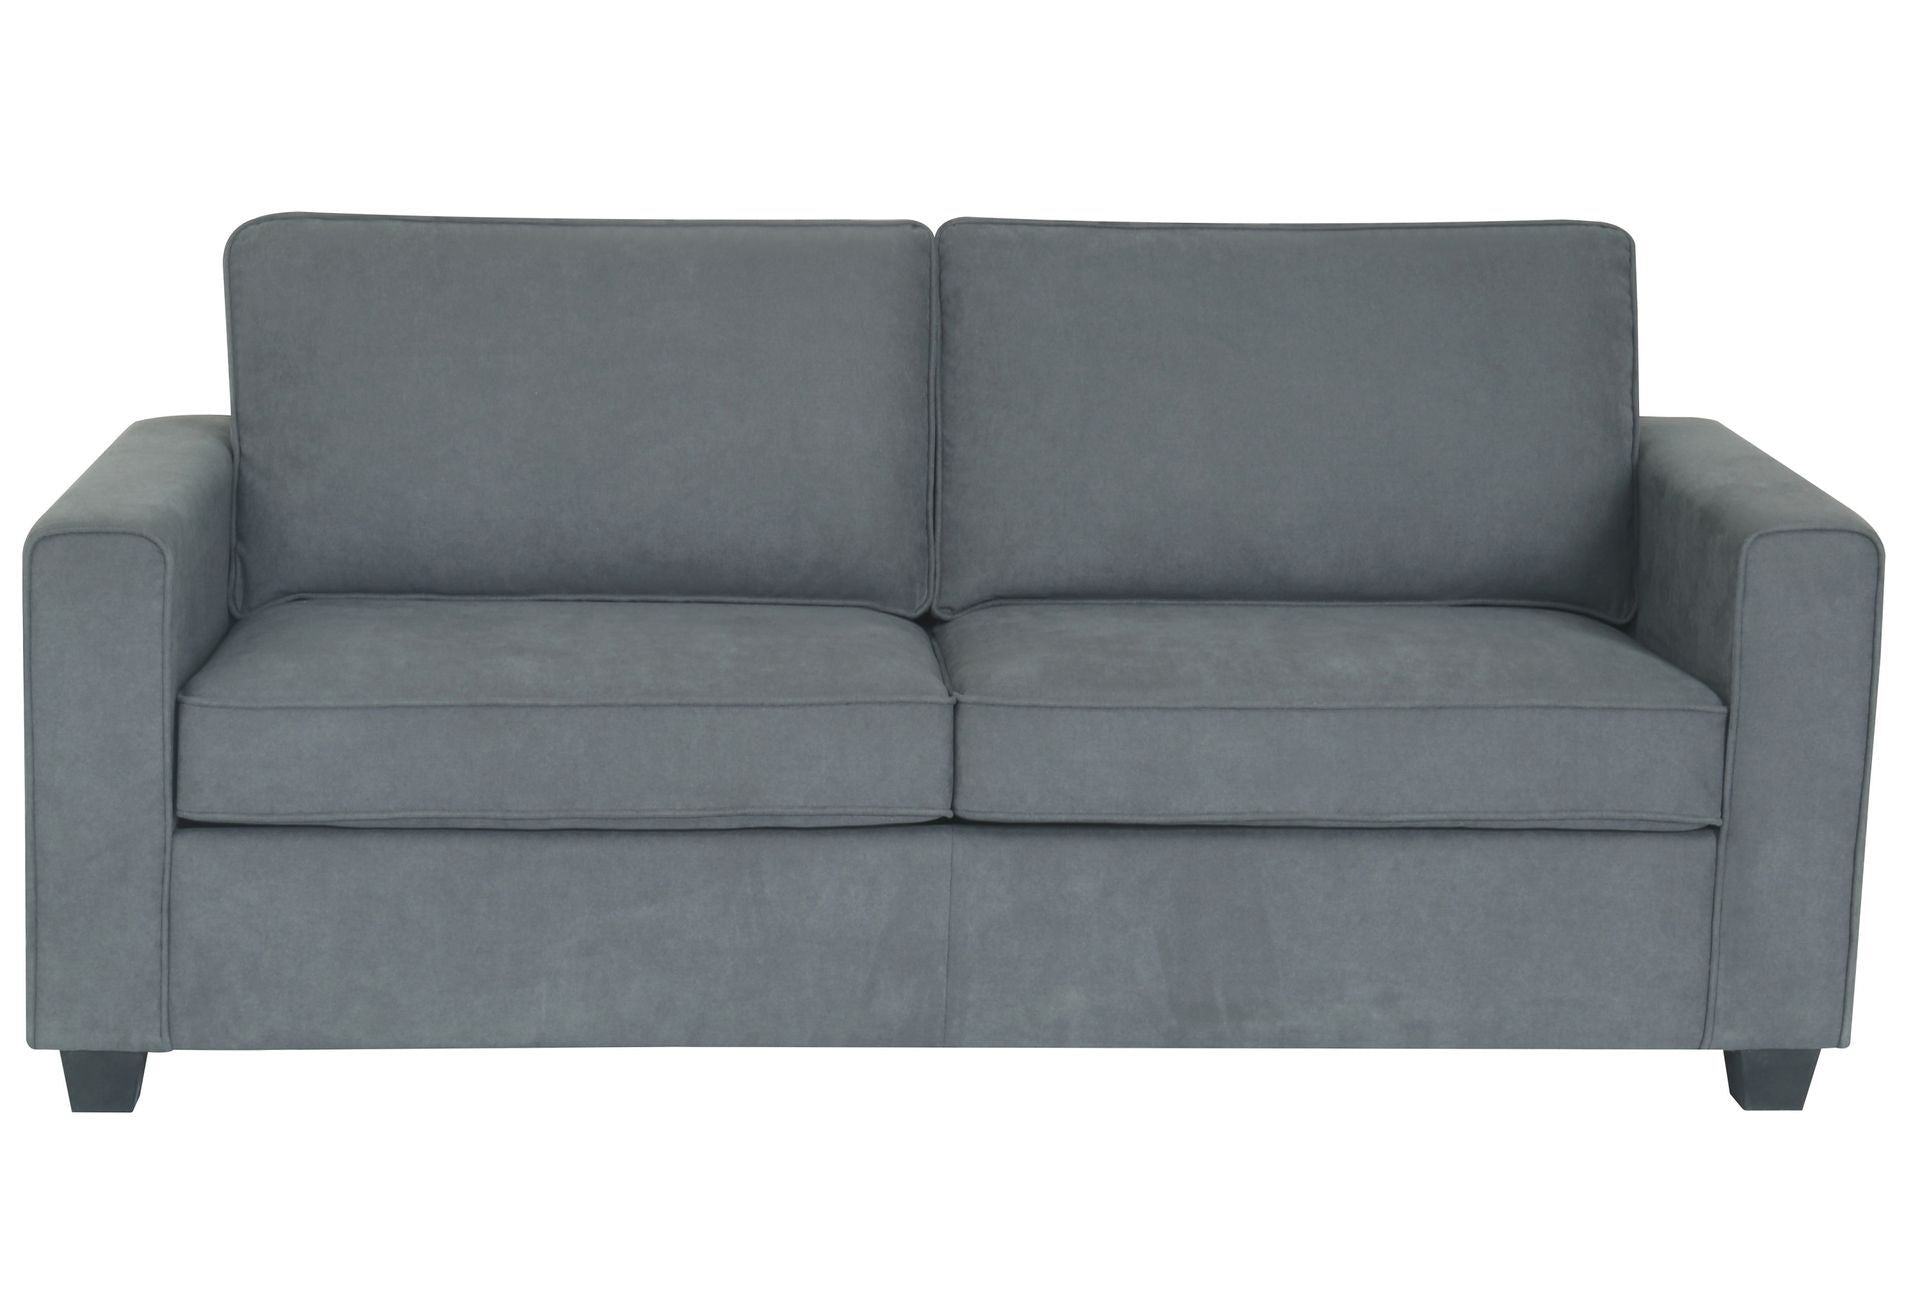 Summit 2 Seater Sofa Bed- Queen Size